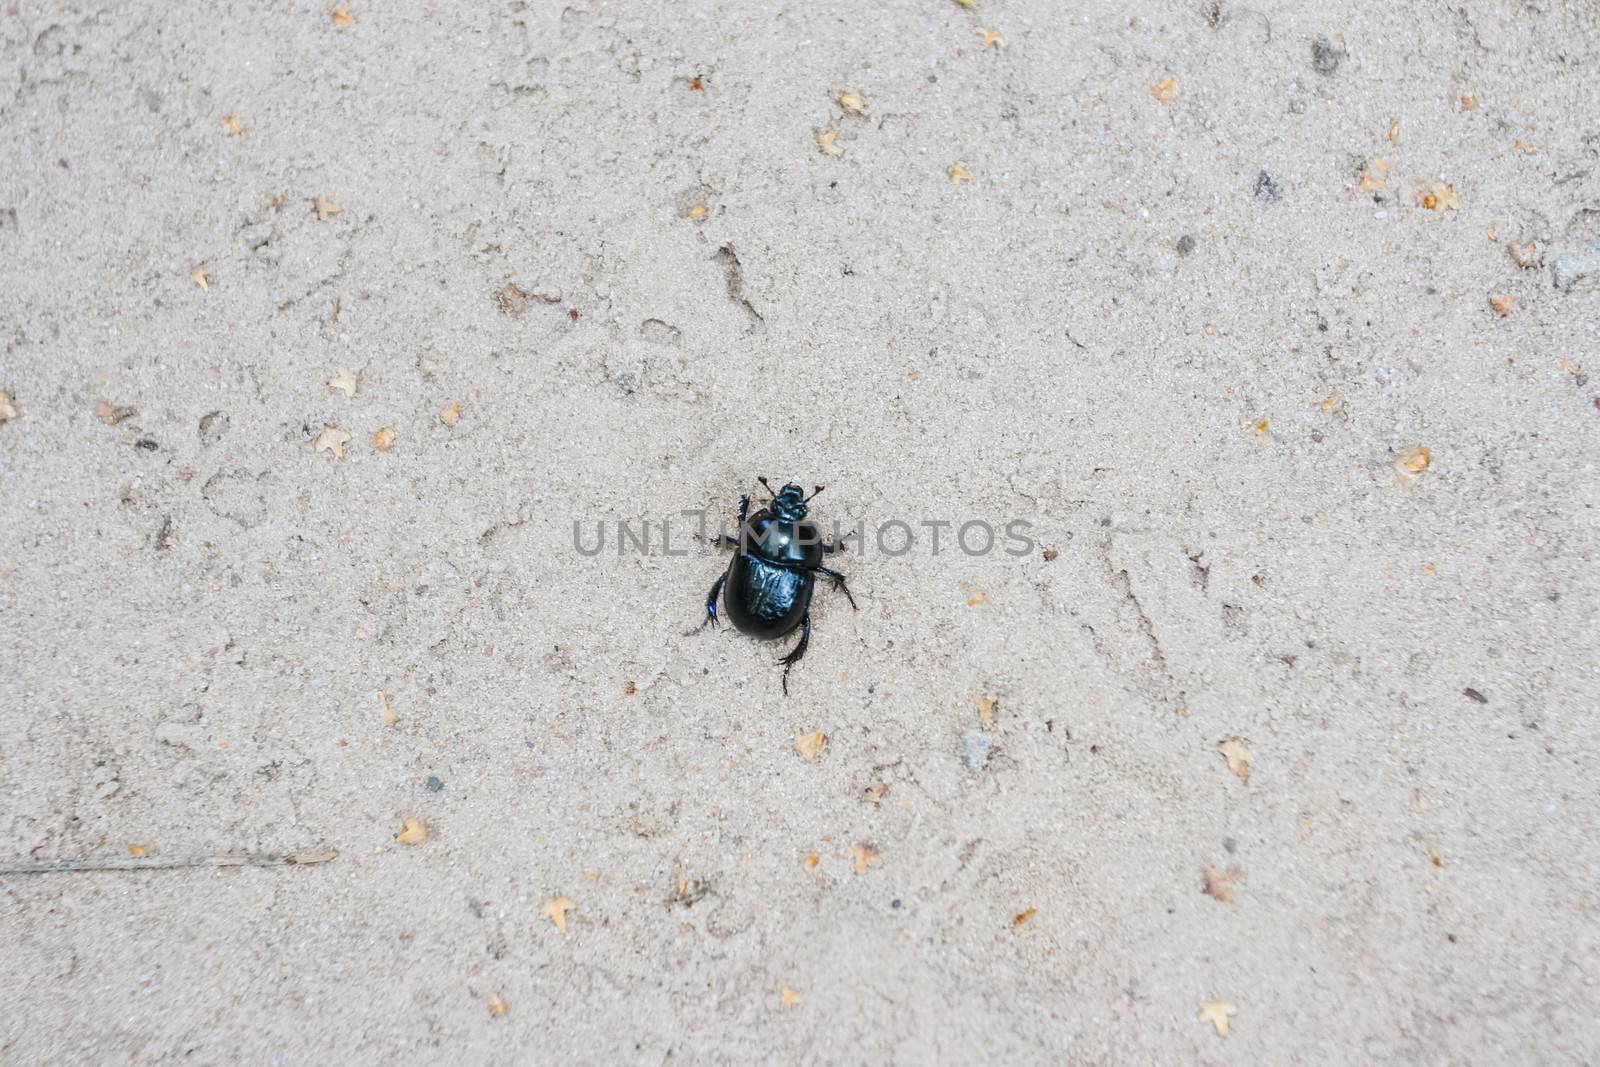 Beetle is weakly lustrous and darkly colored, sometimes with a bluish sheen. The body shape is very compact and arched toward the top.